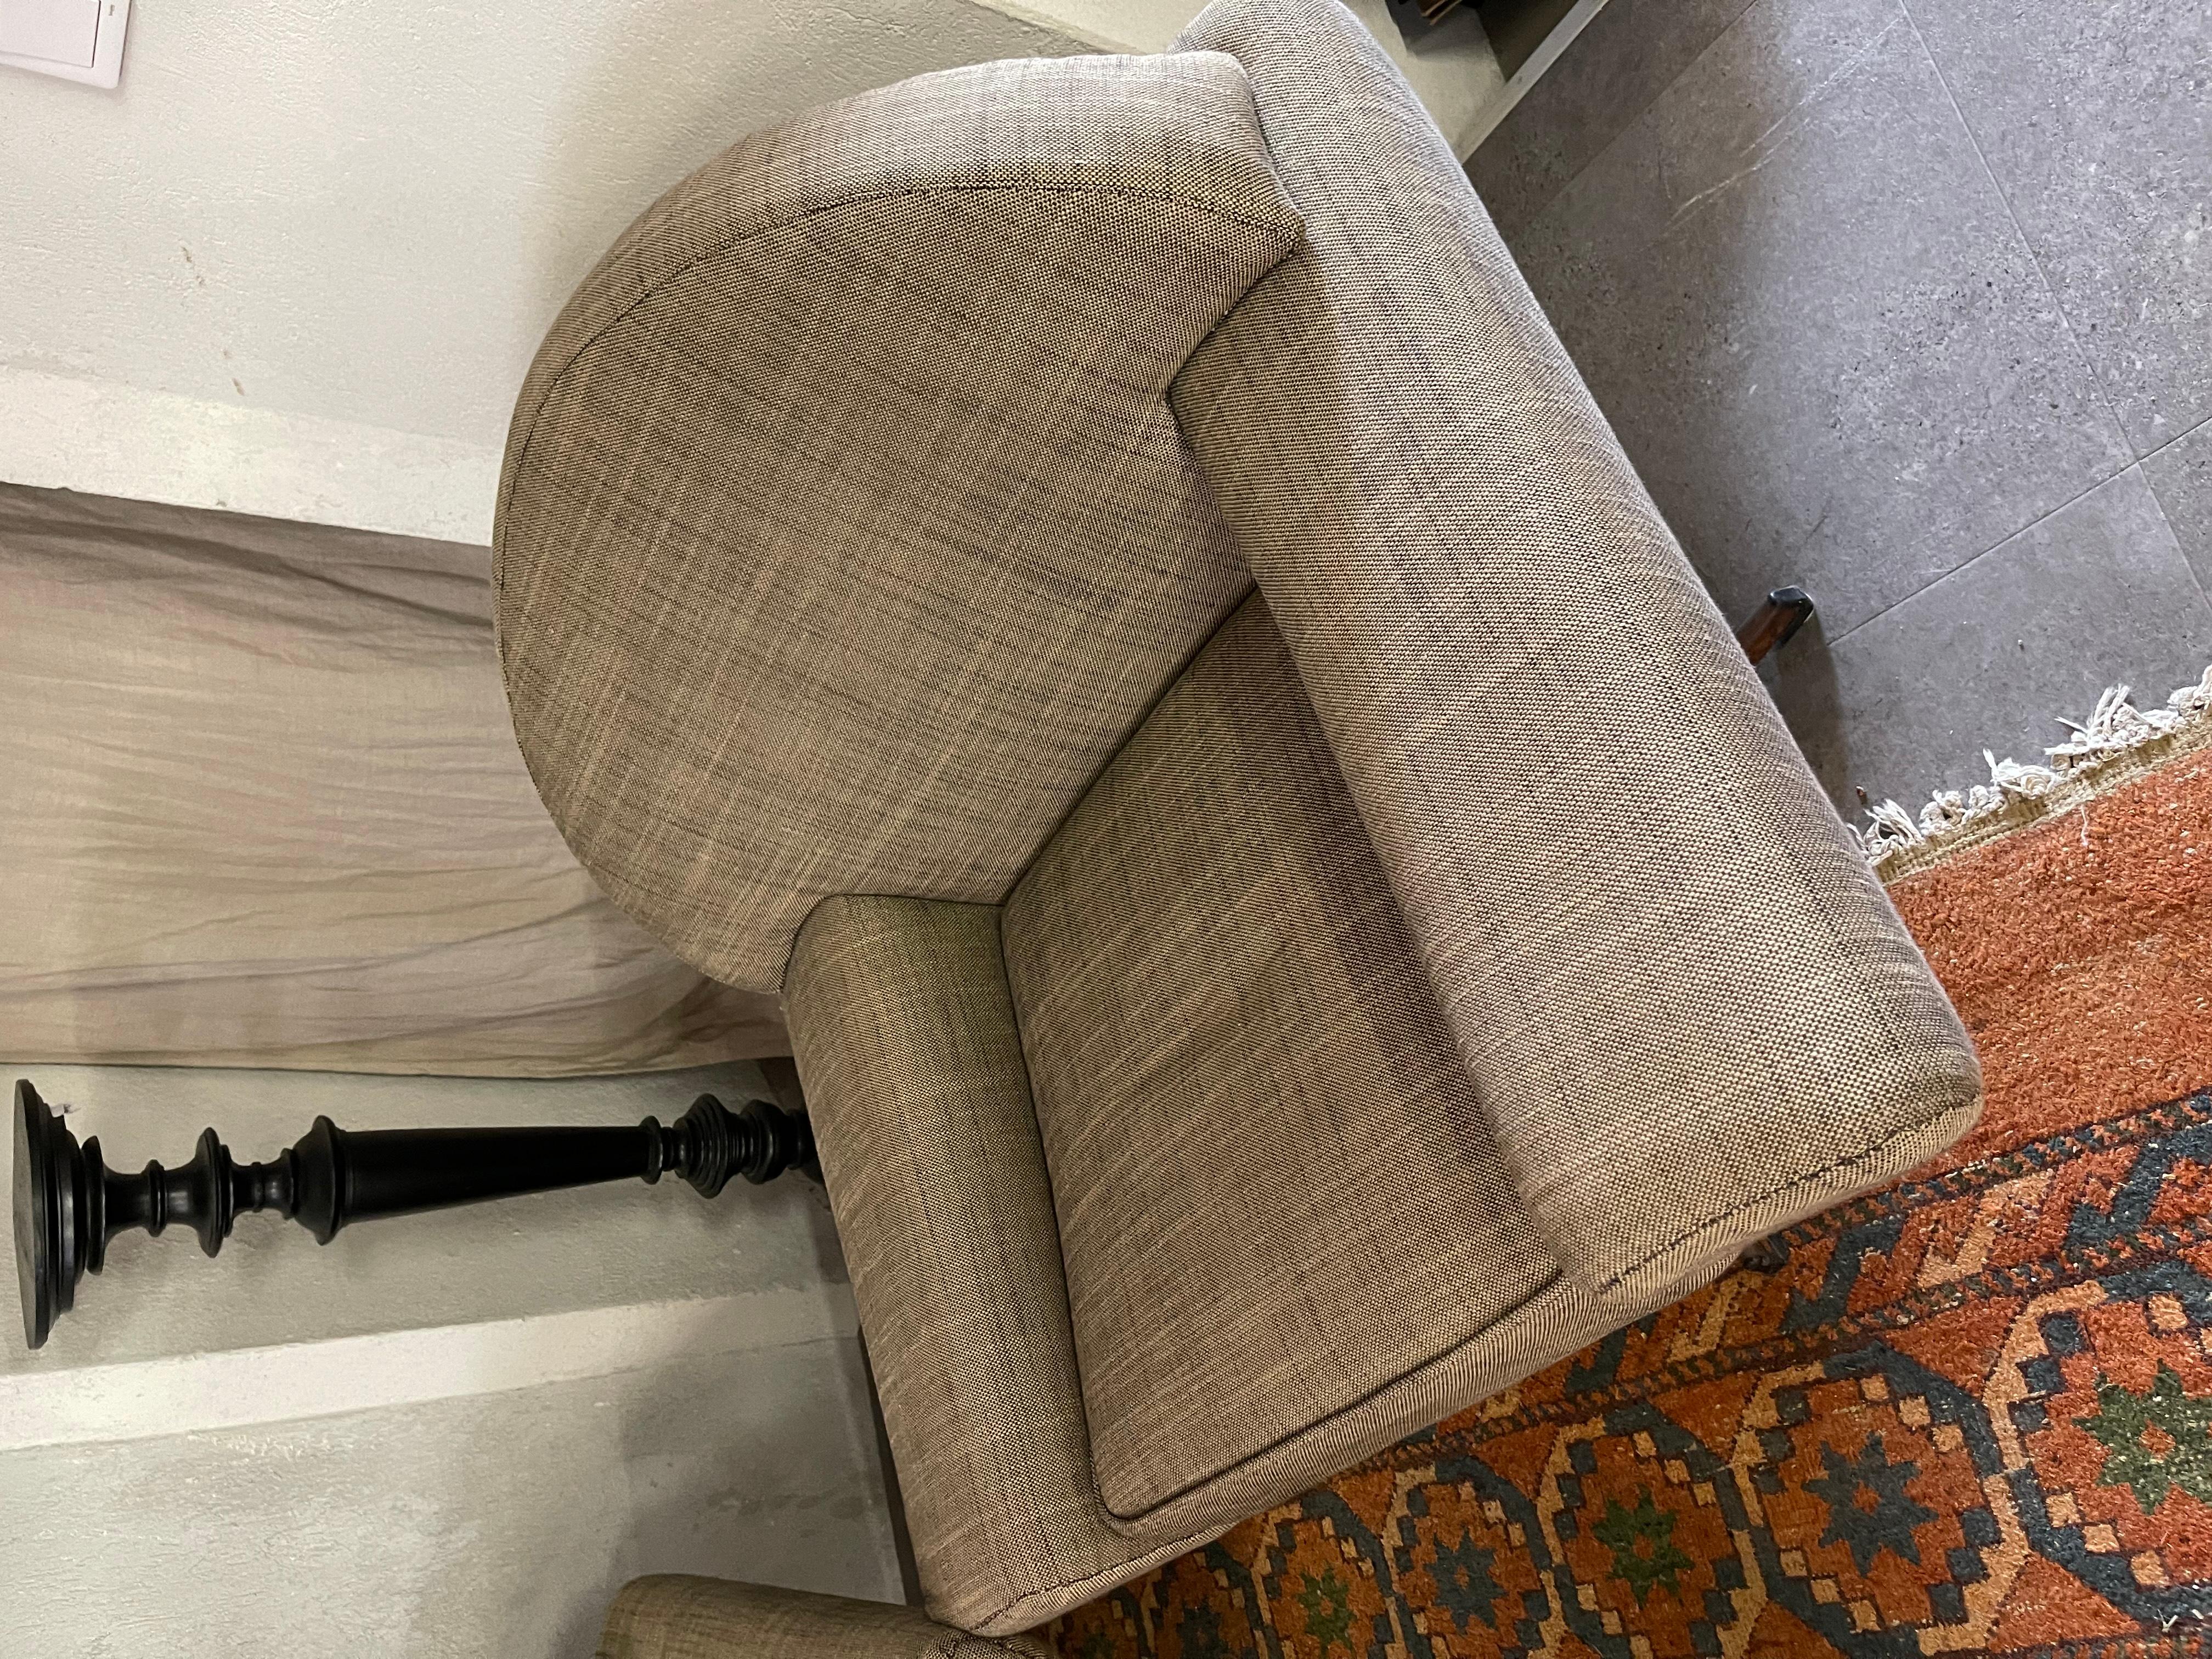 Rare Capri sofa and swivel chair  designed by Johannes Andersen. Produced by Trensum, Sweden, 1960. This fine example retains original in good condition but probably been reupholstered
There are a few light spots so the buyer may wish to reupholster